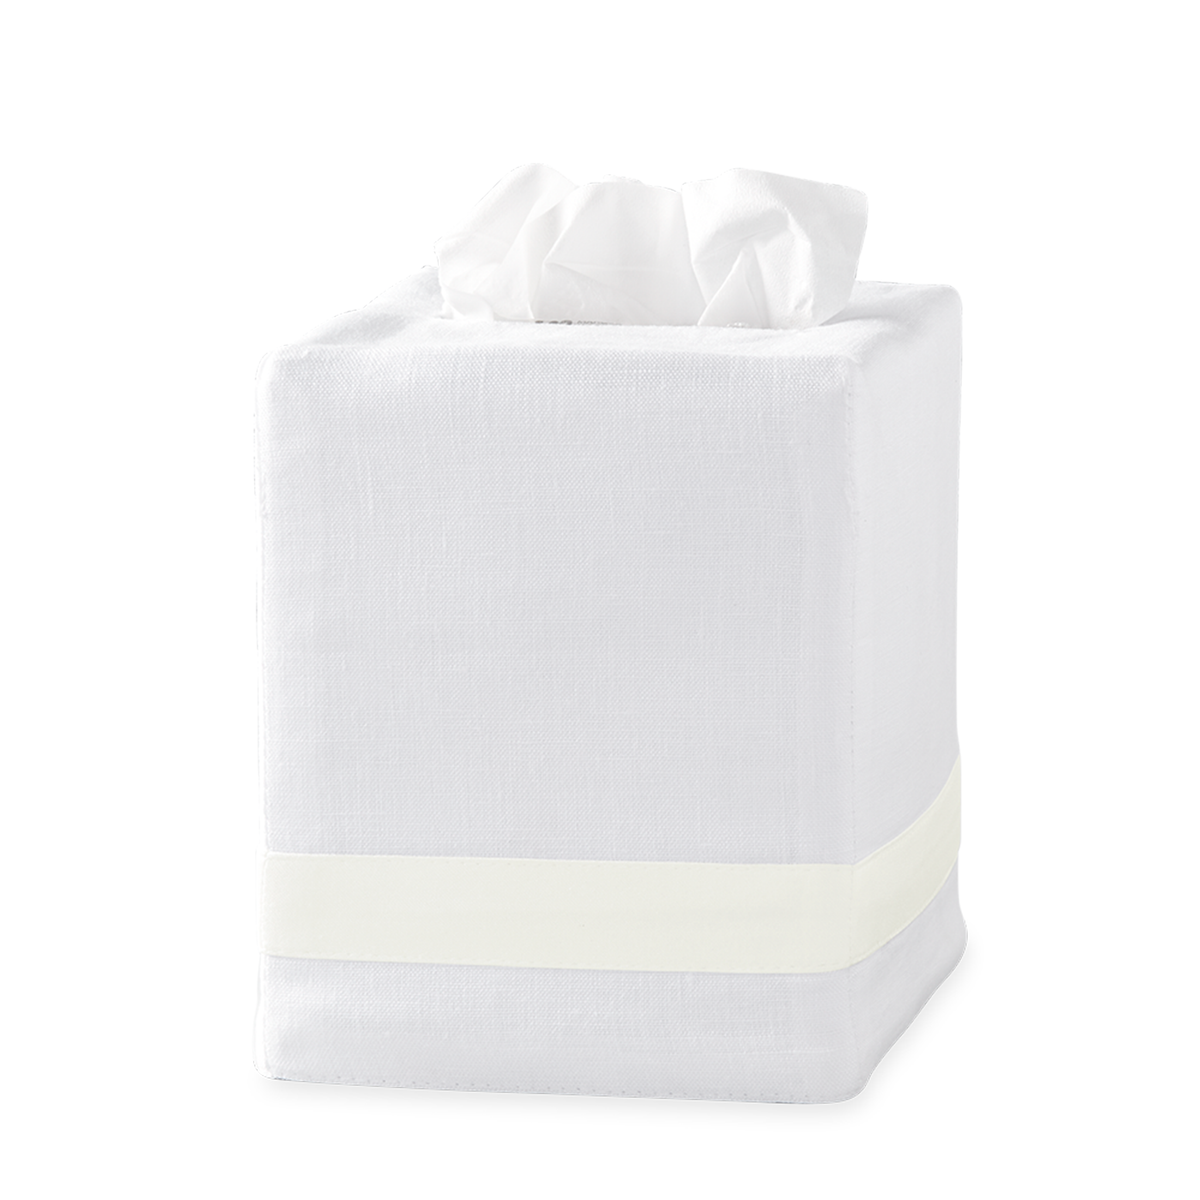 Silo Image of Matouk Lowell Tissue Box Cover in Color Ivory